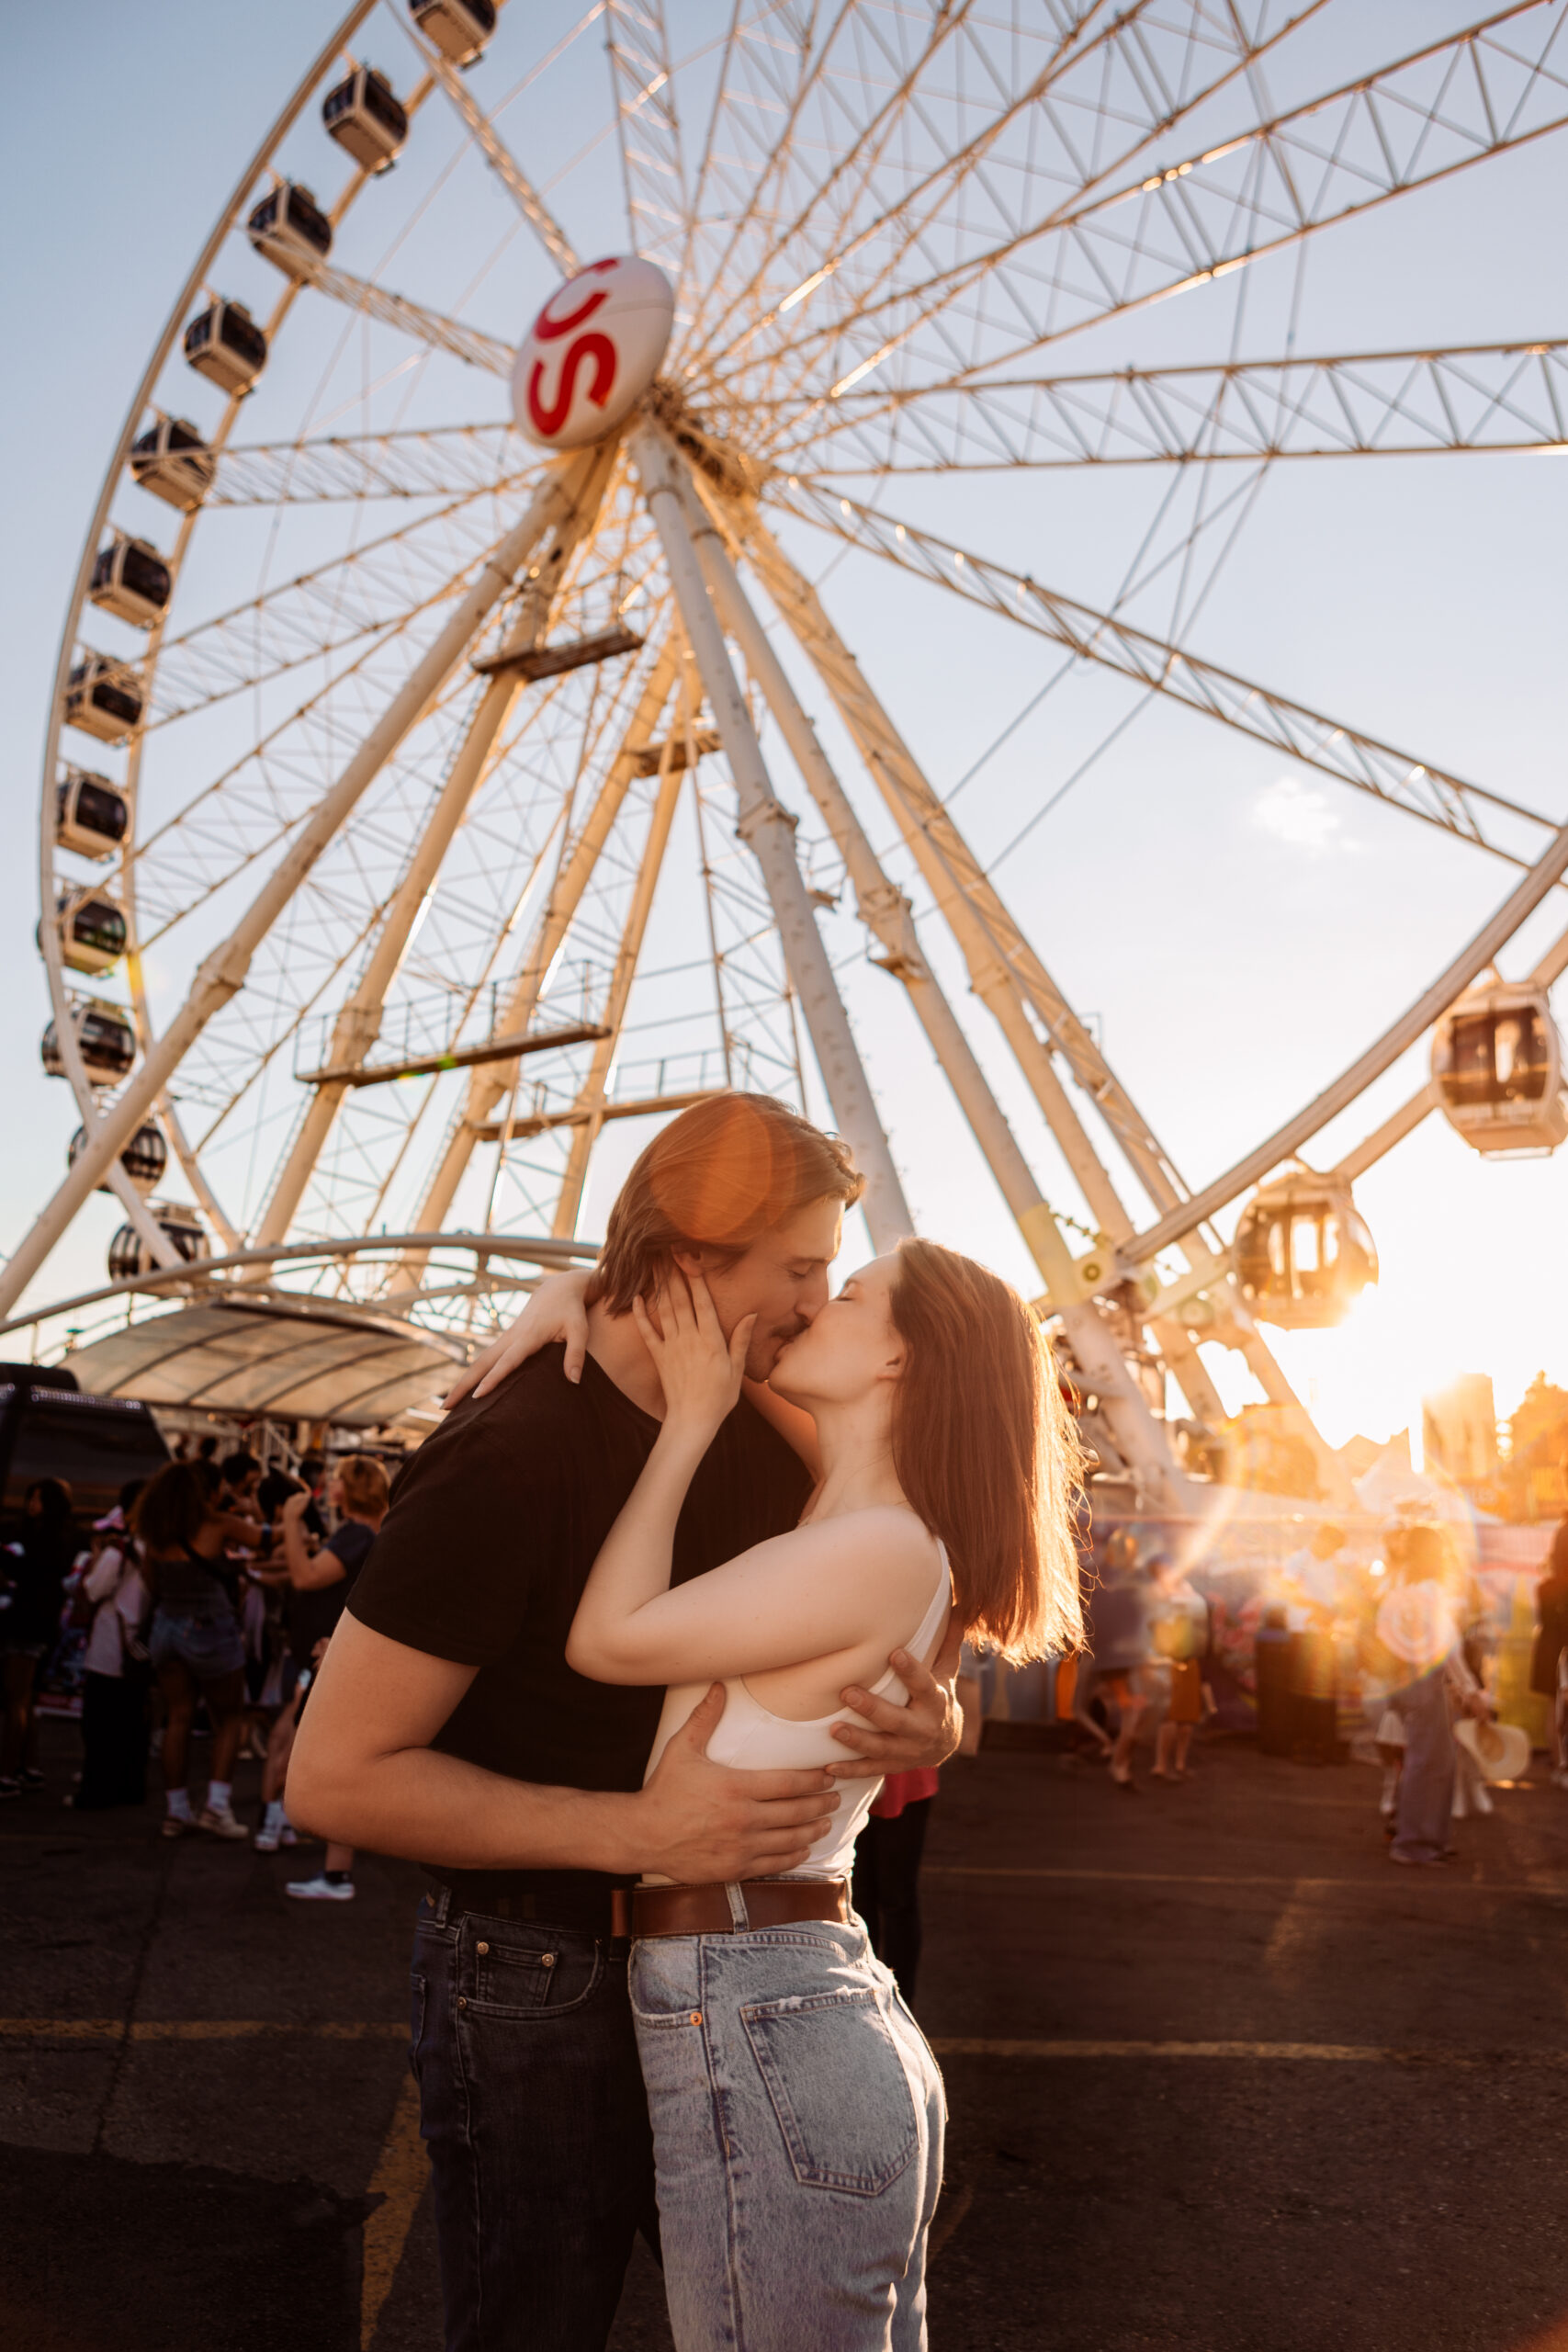 Calgary Stampede Photoshoot; Capturing Love Amidst the chaos